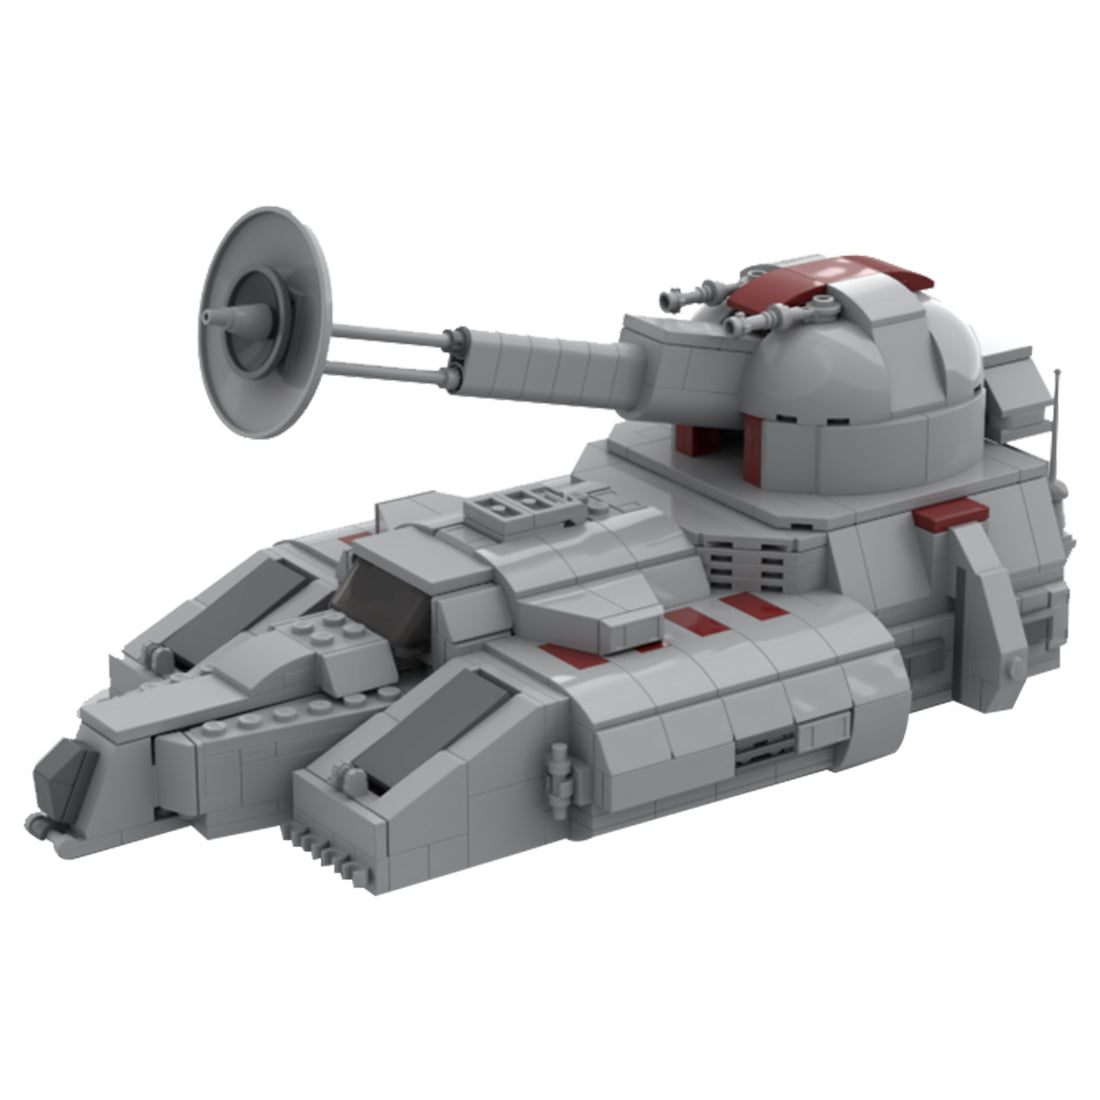 MOC-110432 Space Wars RX-200 Angriffspanzer